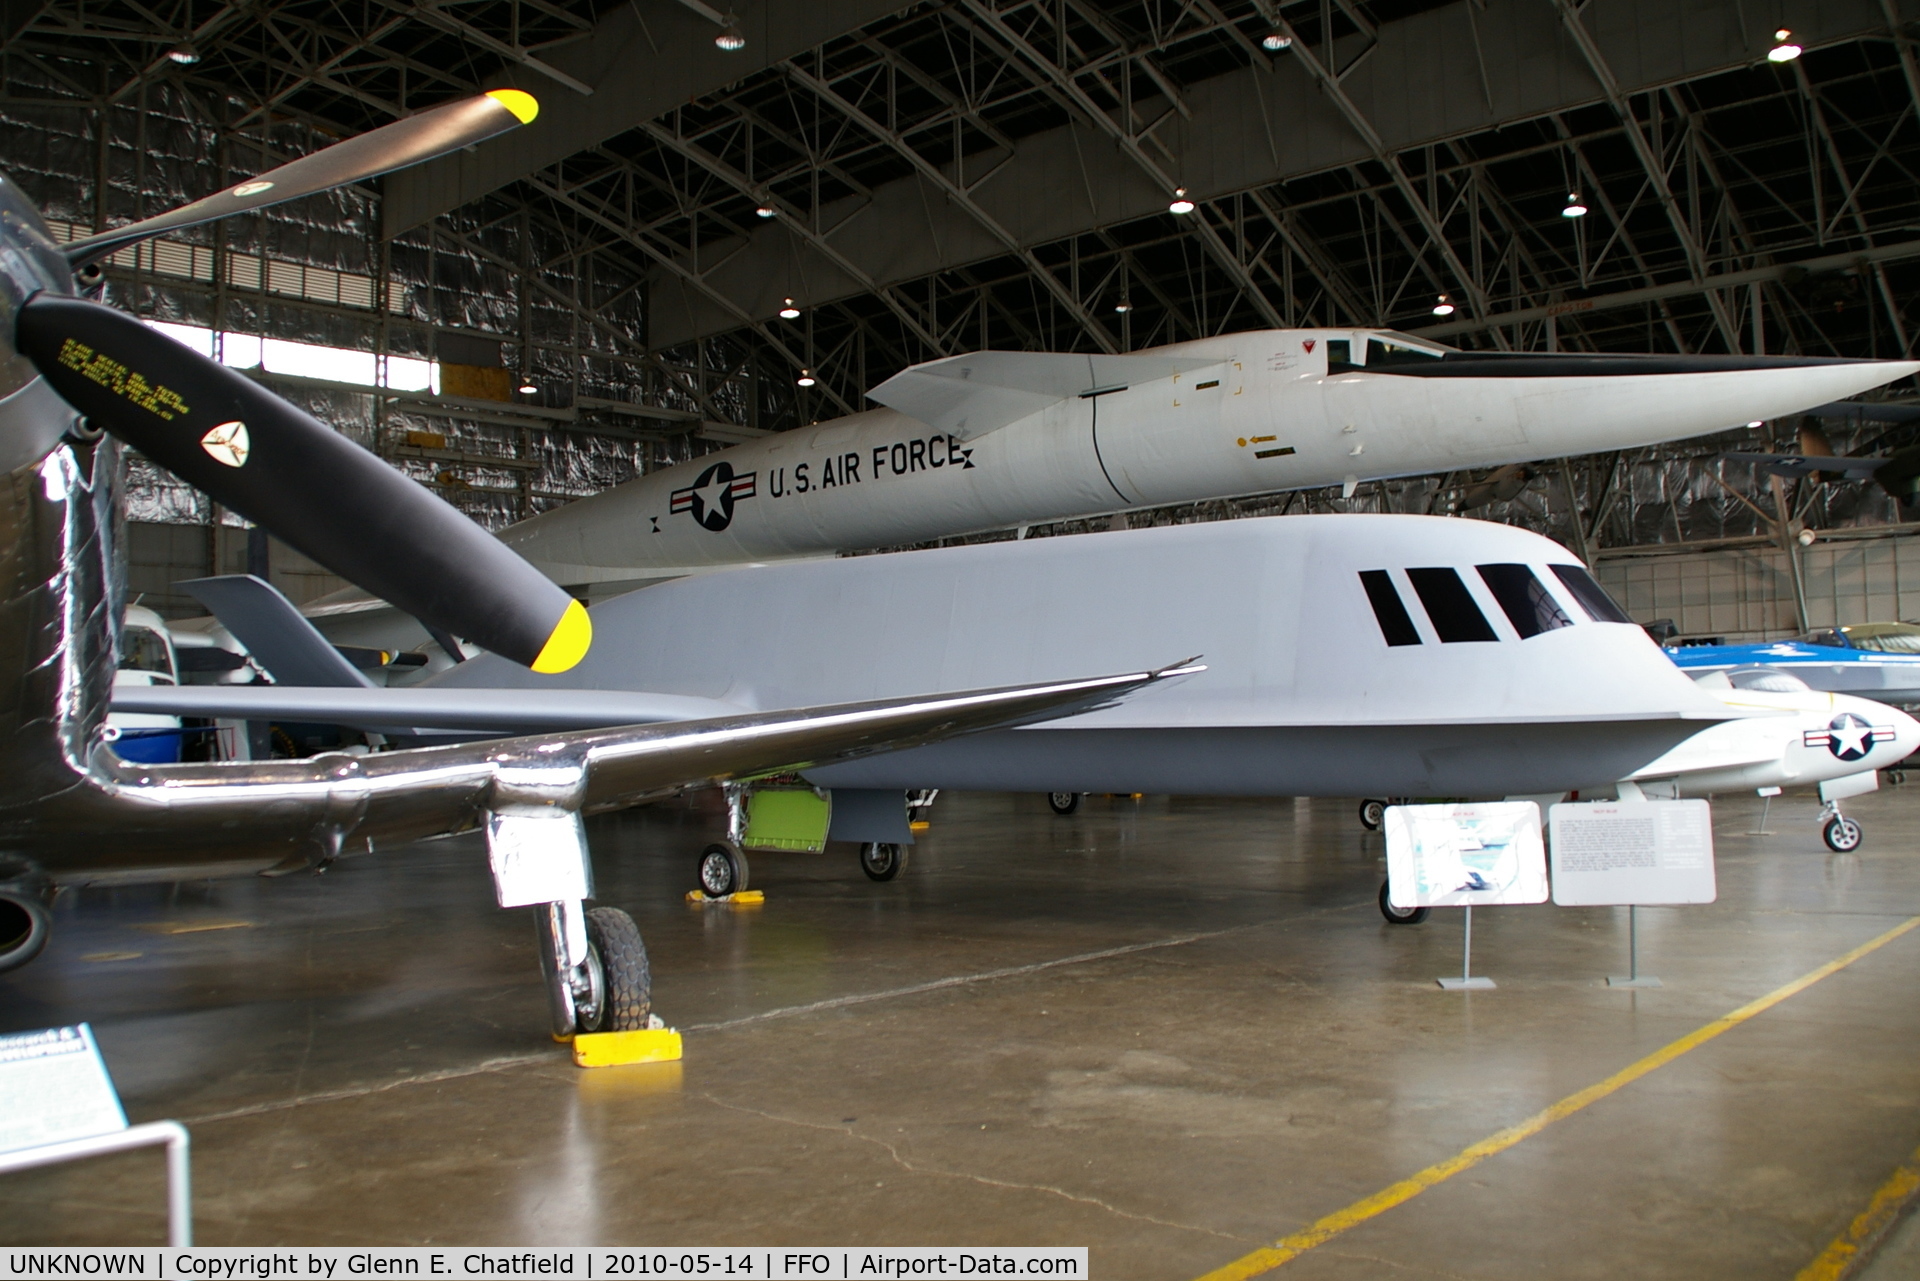 UNKNOWN, 1981 Northrop YF-117D Tacit Blue C/N Not found, Tacit Blue at the National Museum of the USAF